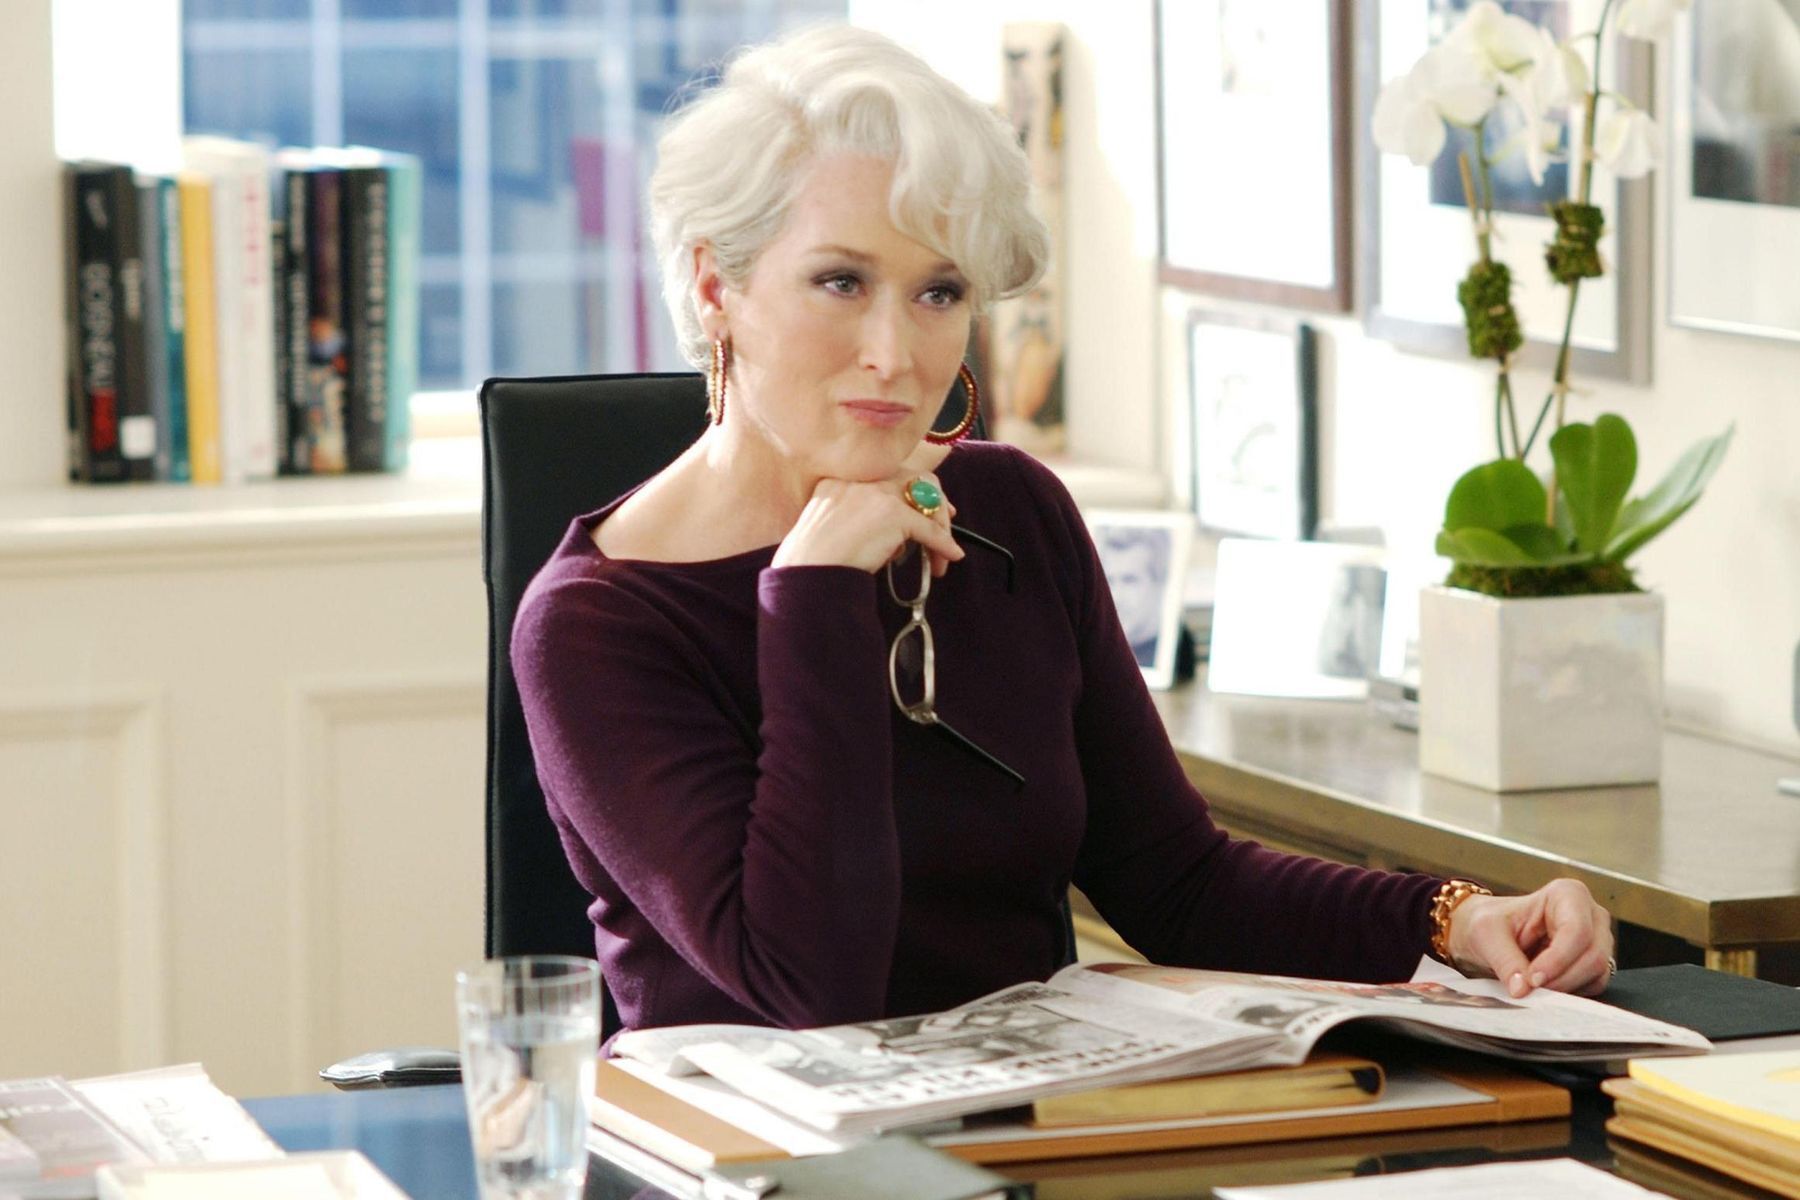 <p>Whatever name you call them—chief, captain, bigwig, or head honcho—the one thing these bosses have in common is being complete nightmares to work for. From the <a href="https://theindependentcritic.com/devil_wears_prada">“devilish aura”</a> Meryl Streep exudes in <a href="https://www.imdb.com/title/tt0458352/"><em>The Devil Wears Prada</em></a> to the immature, impetuous and self-proclaimed <a href="https://www.youtube.com/watch?v=vaNpcgmj5qI&ab_channel=TheOfficeClips">“World’s Best Boss”</a> Michael Scott in <a href="https://www.imdb.com/title/tt0386676/"><em>The Office</em></a>, these are the worst bosses to ever appear on TV and in film. Just be thankful you don’t report to any of them.</p>